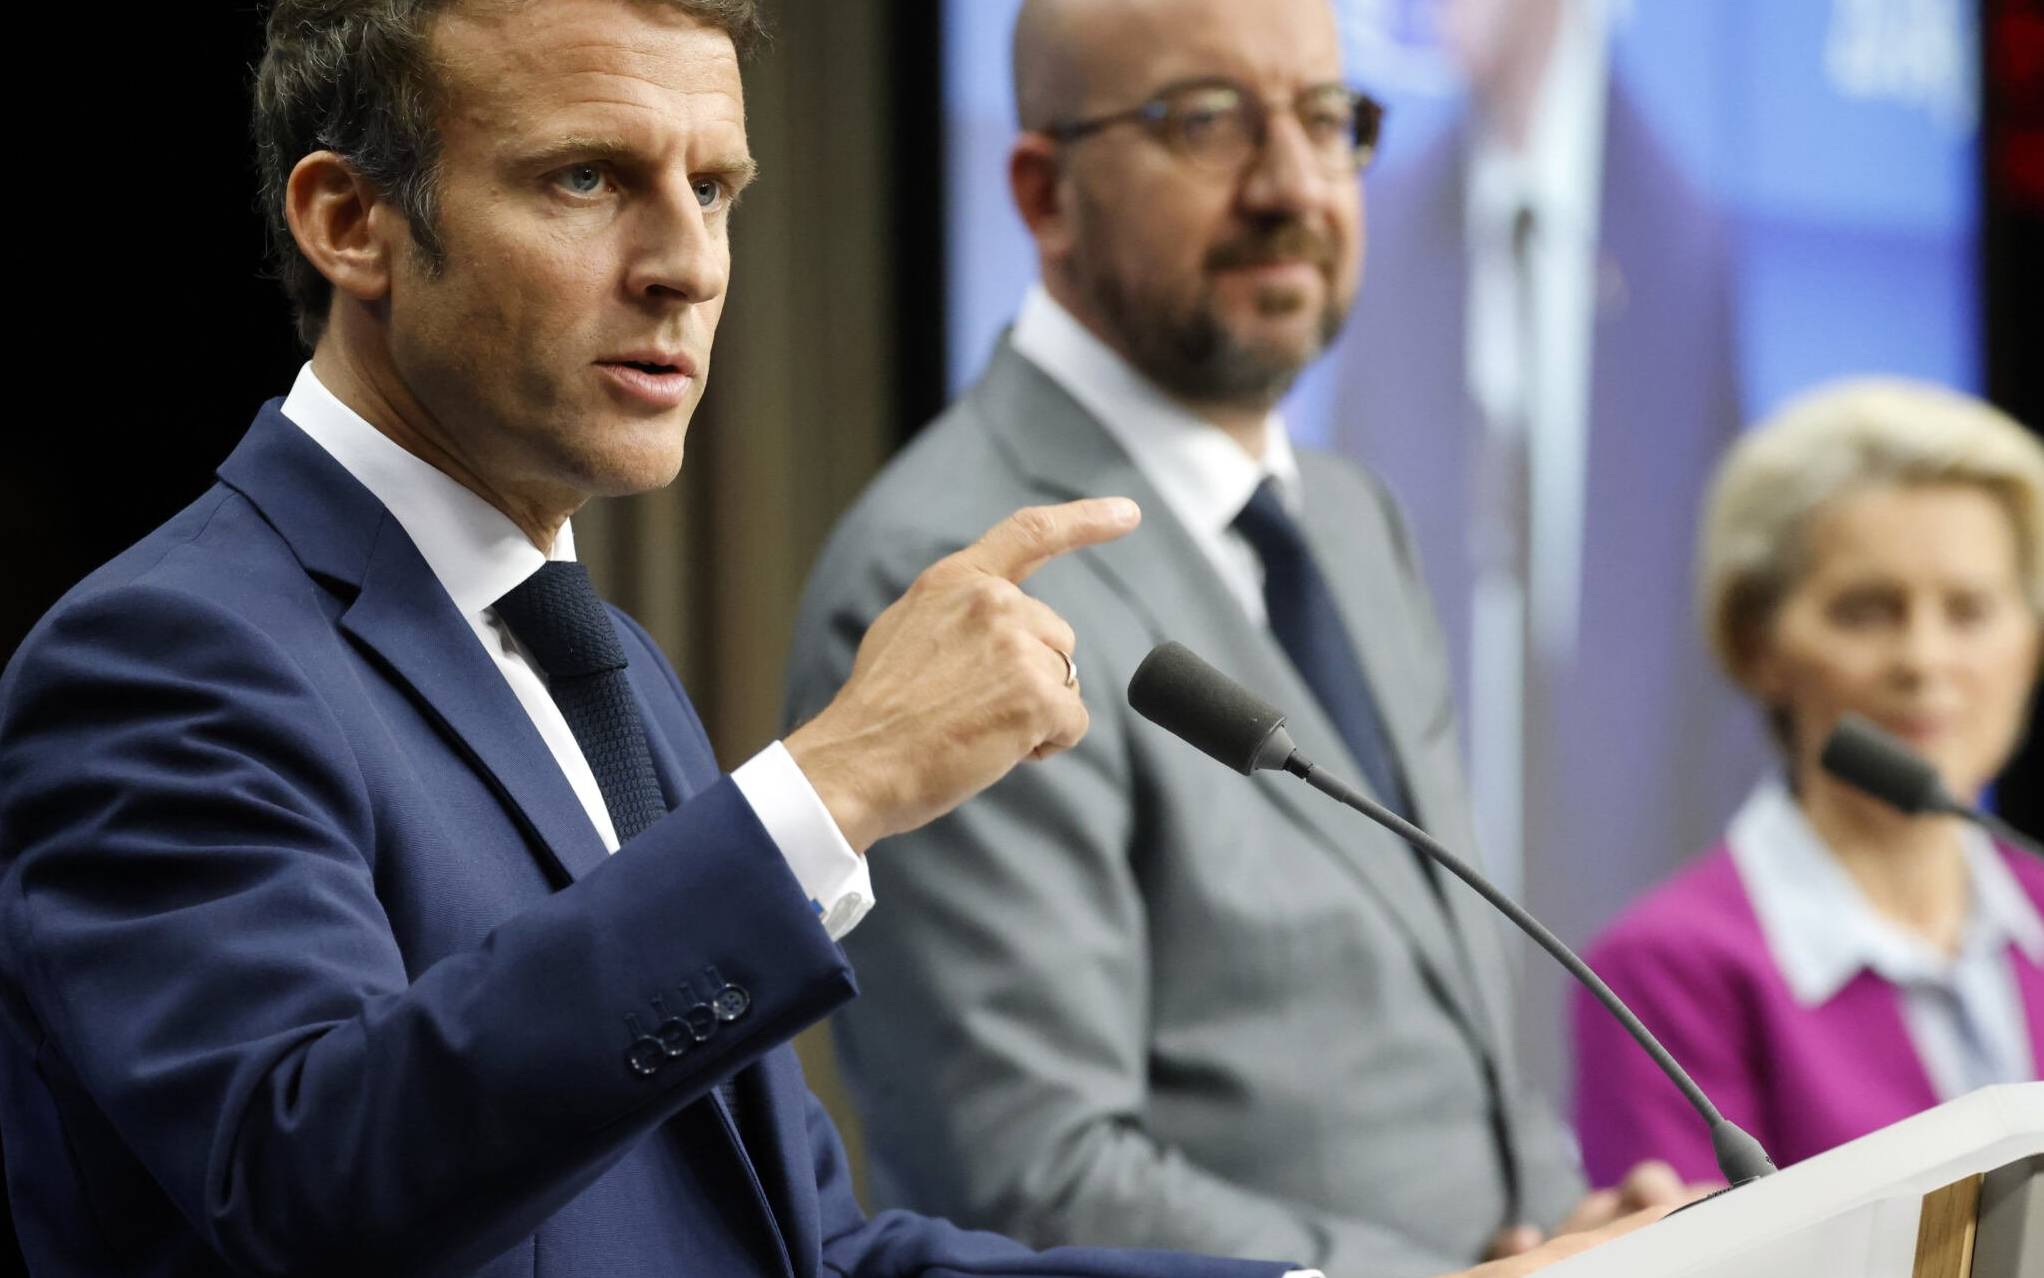 France's President Emmanuel Macron (L) gives a press conference with President of the European Council Charles Michel (C) and President of the European Commission Ursula von der Leyen at The European Council Building in Brussels on June 24, 2022. (Photo by Ludovic MARIN / AFP)